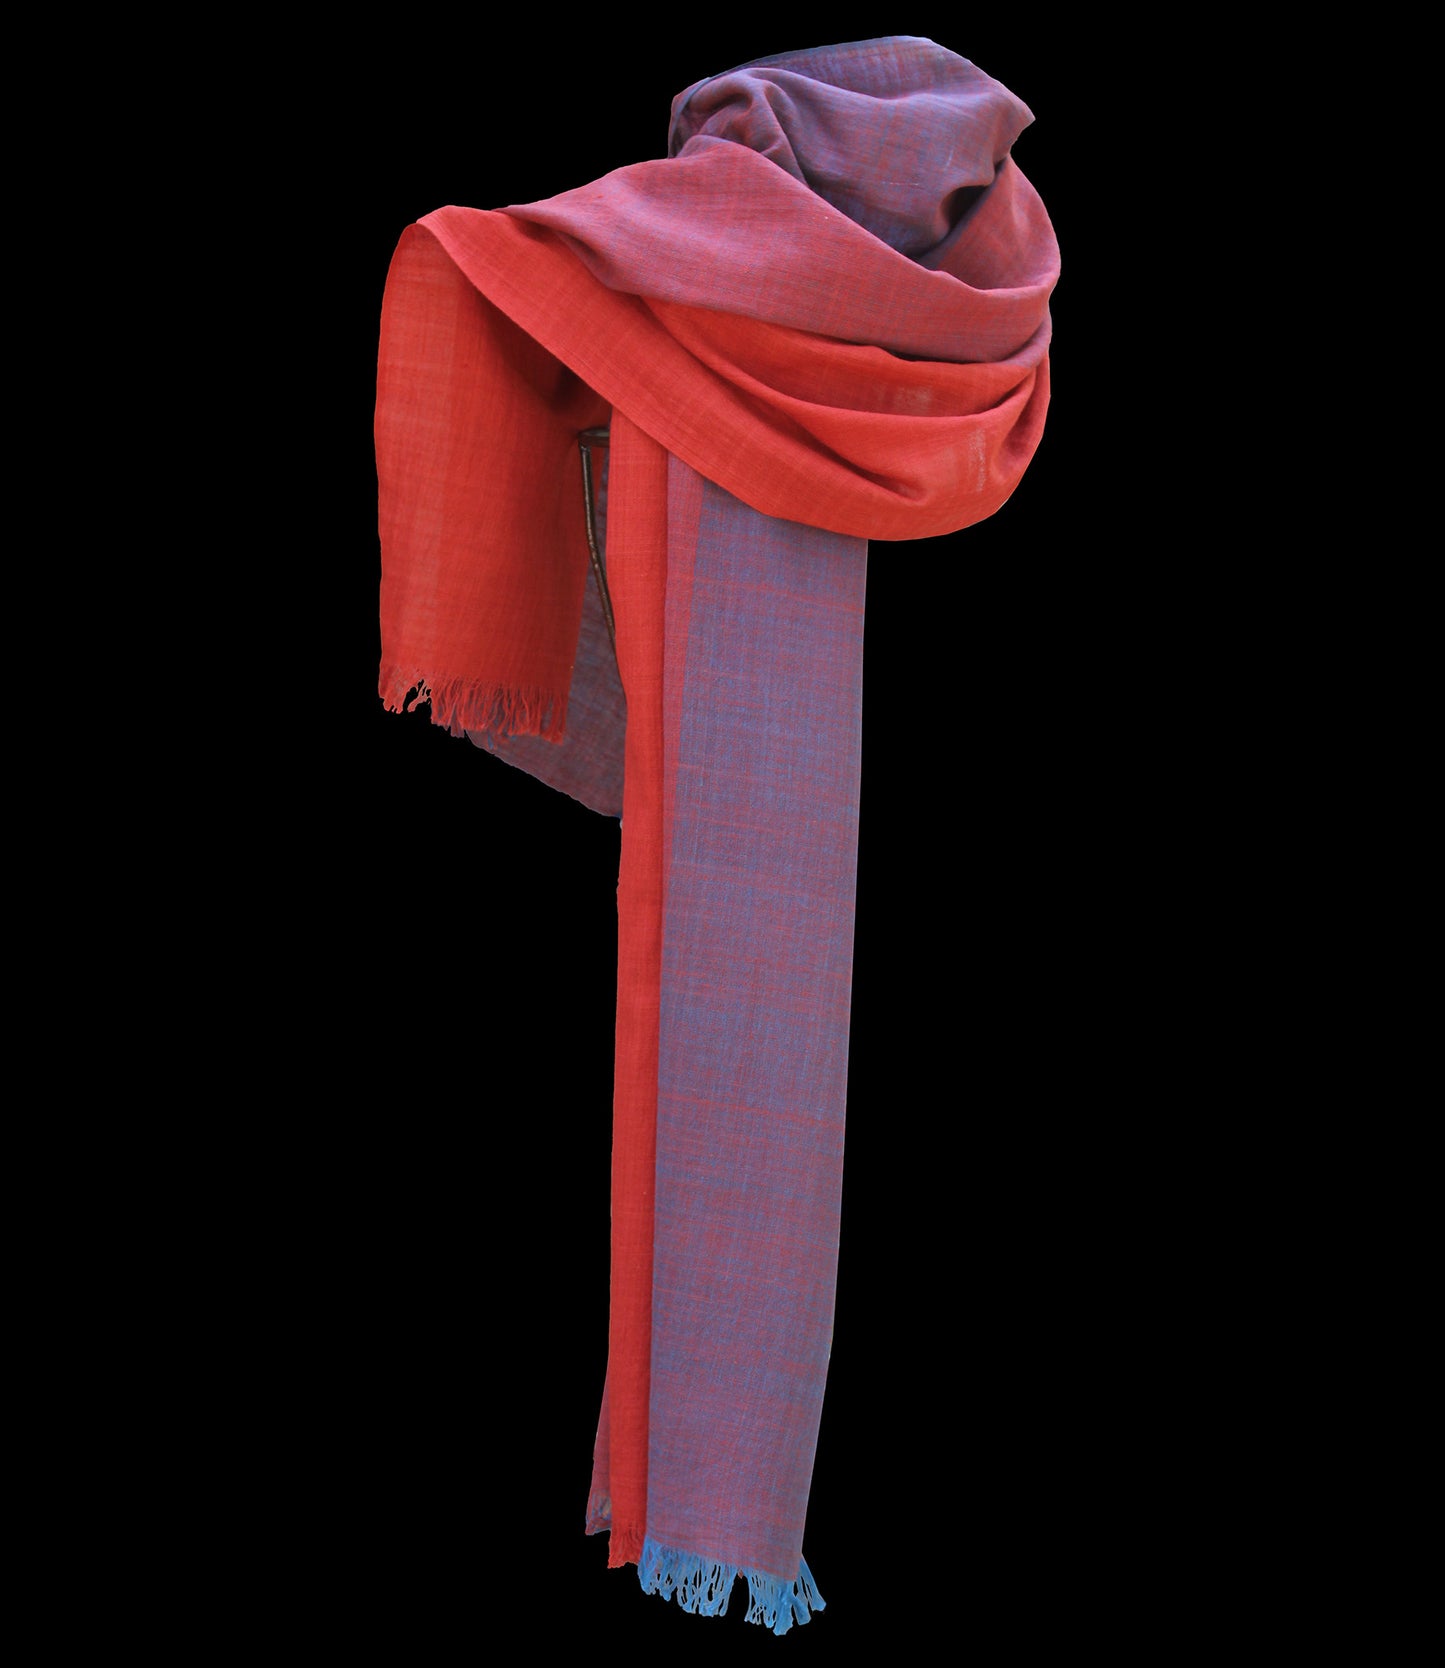 Organic cotton scarf in bright red and aqua blue, ombré effect